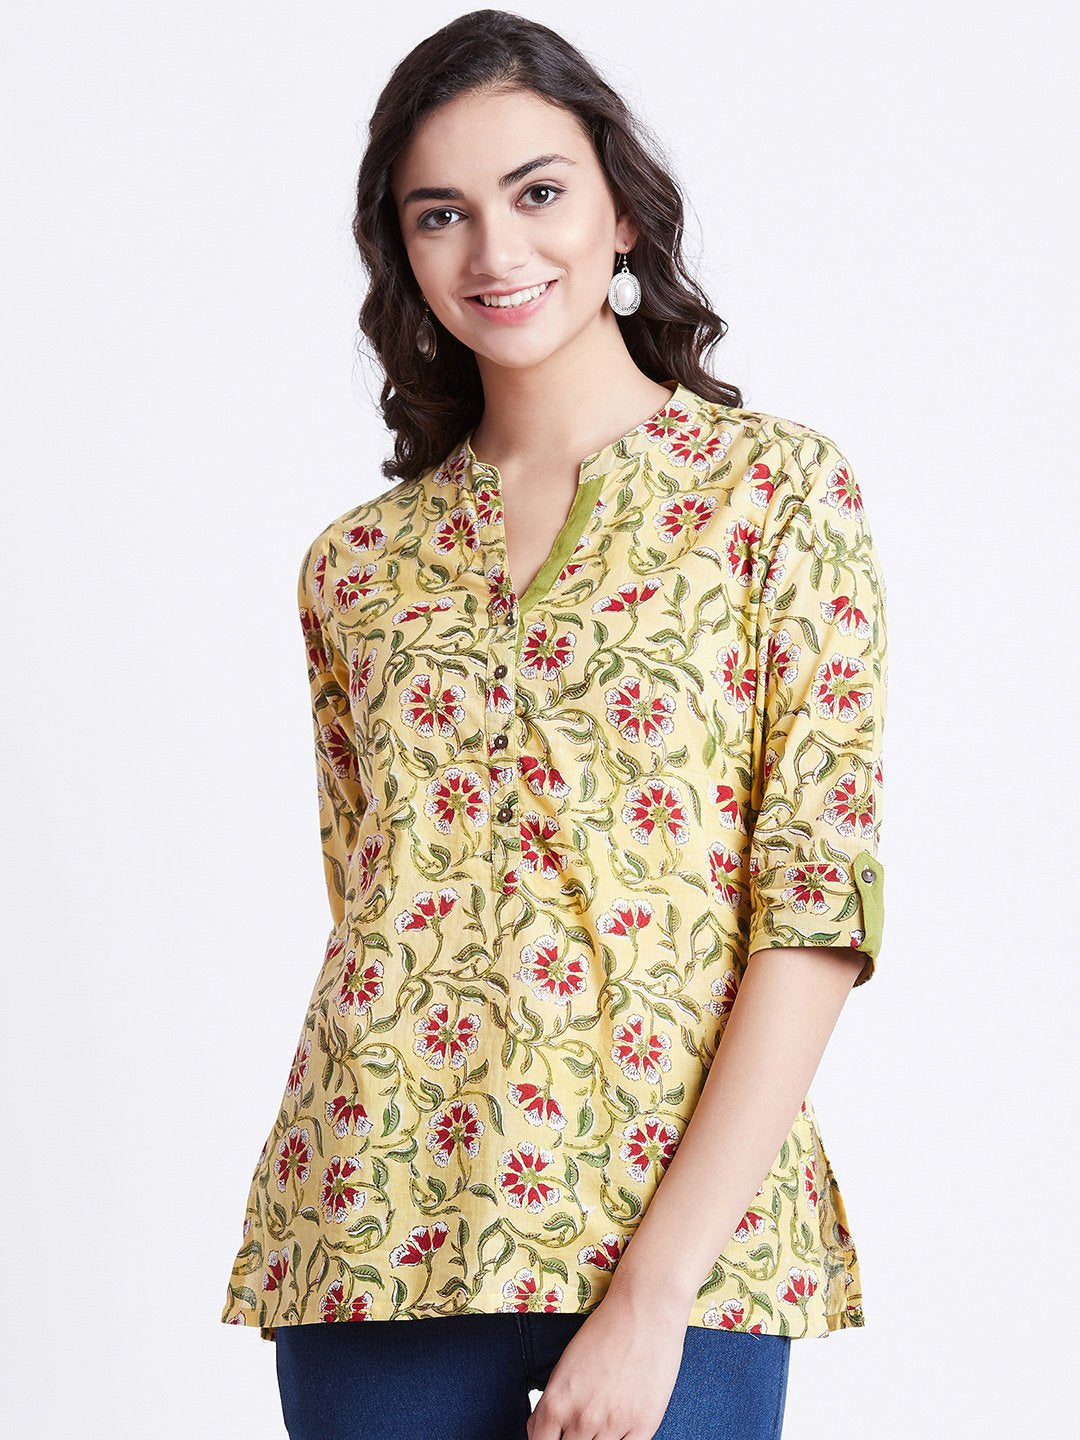 Hand Block Printed Indian tunic/ kurti in lime yellow colour in floral design